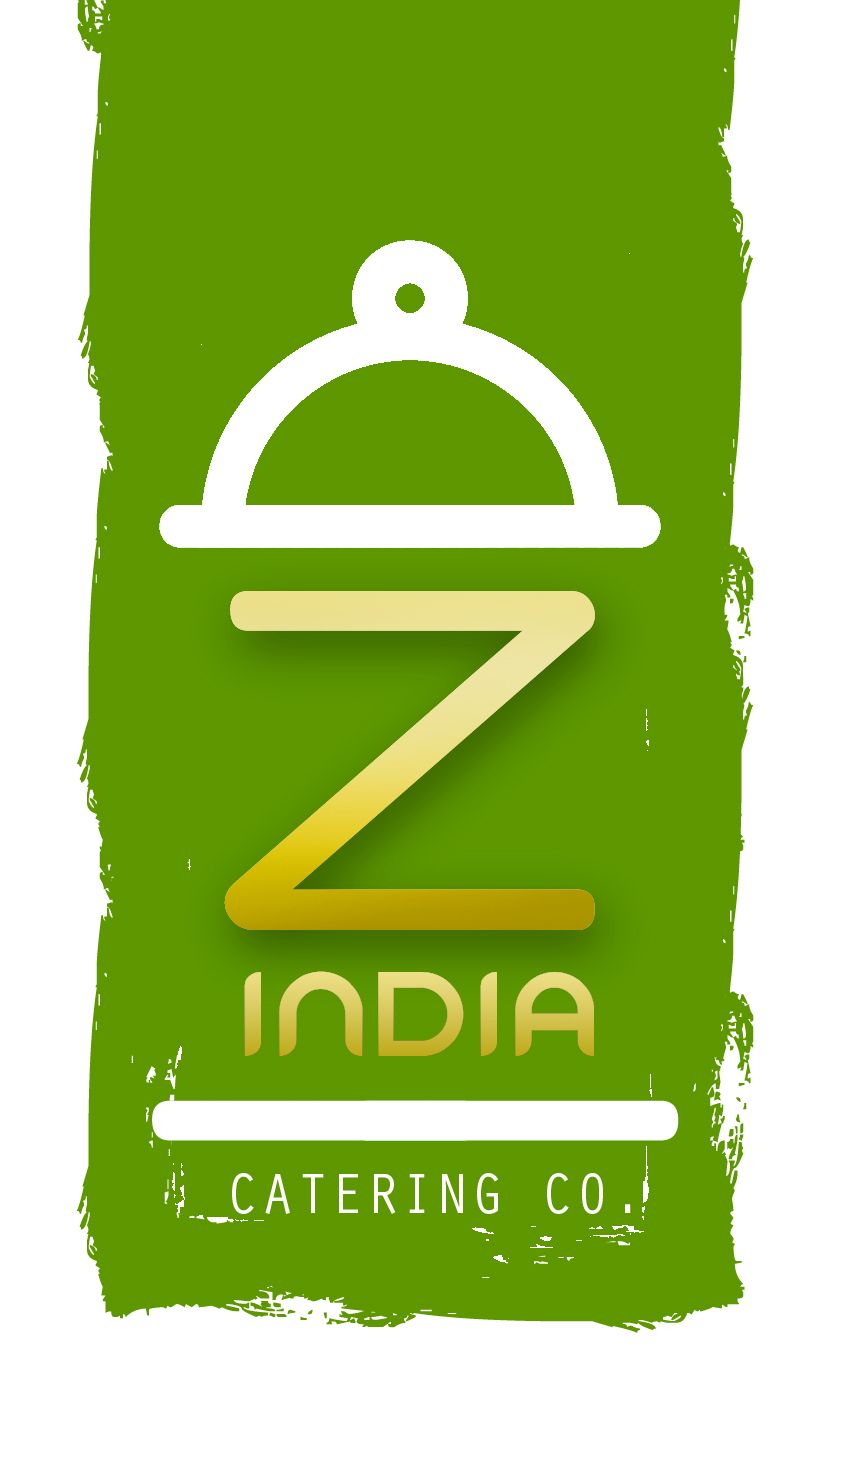 Z India Catering Co.